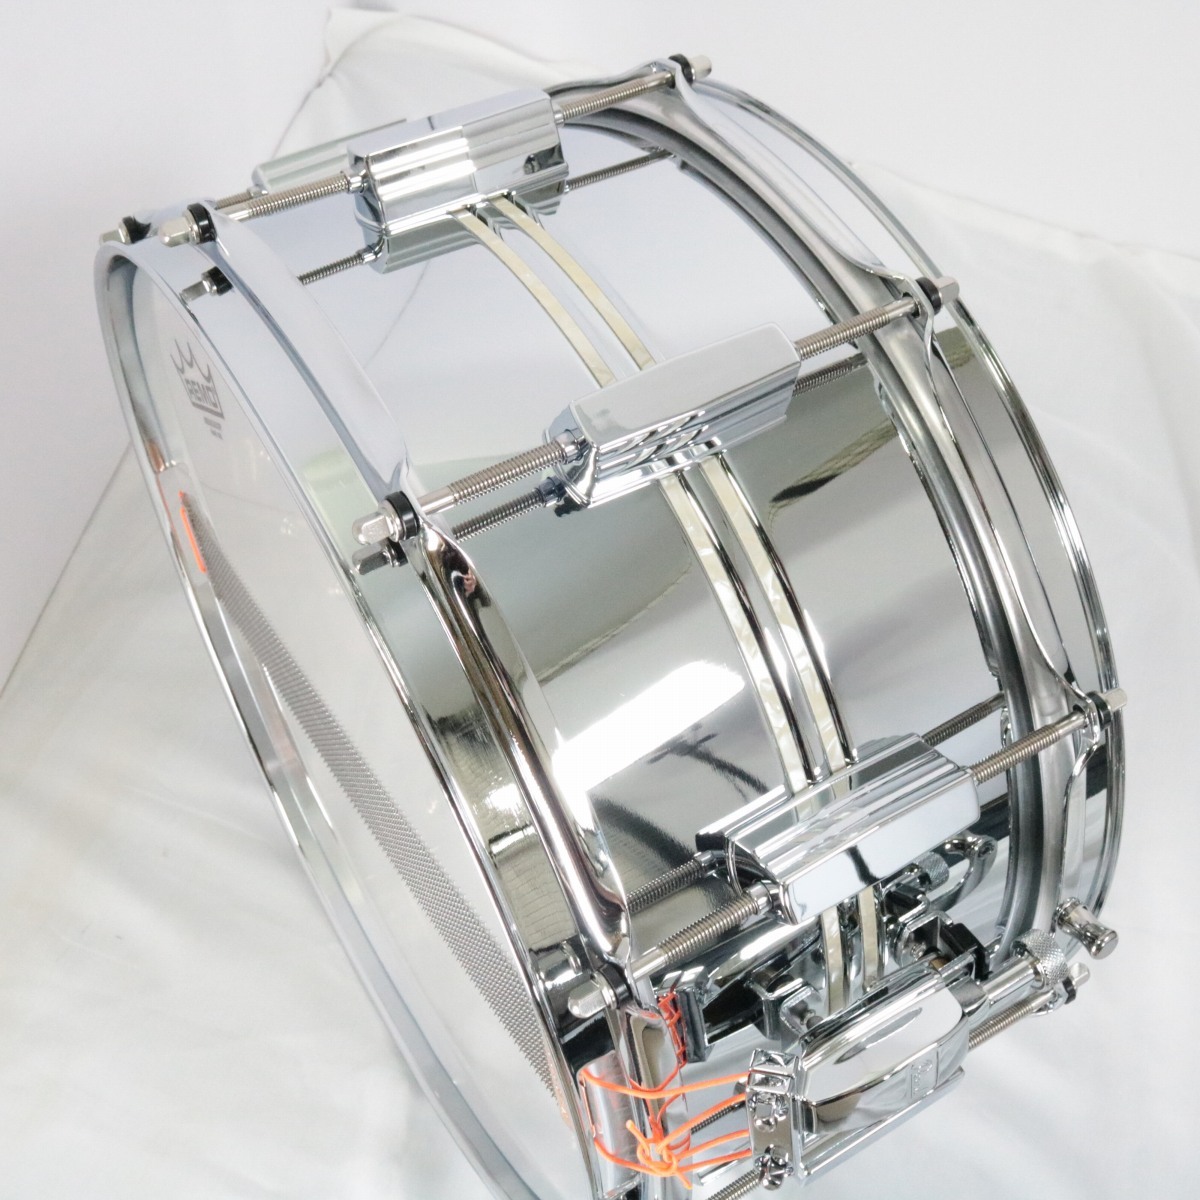 Pearl Duoluxe DUX1465BR 14x6.5 Chrome Over Brass Snare Drum ソフト 